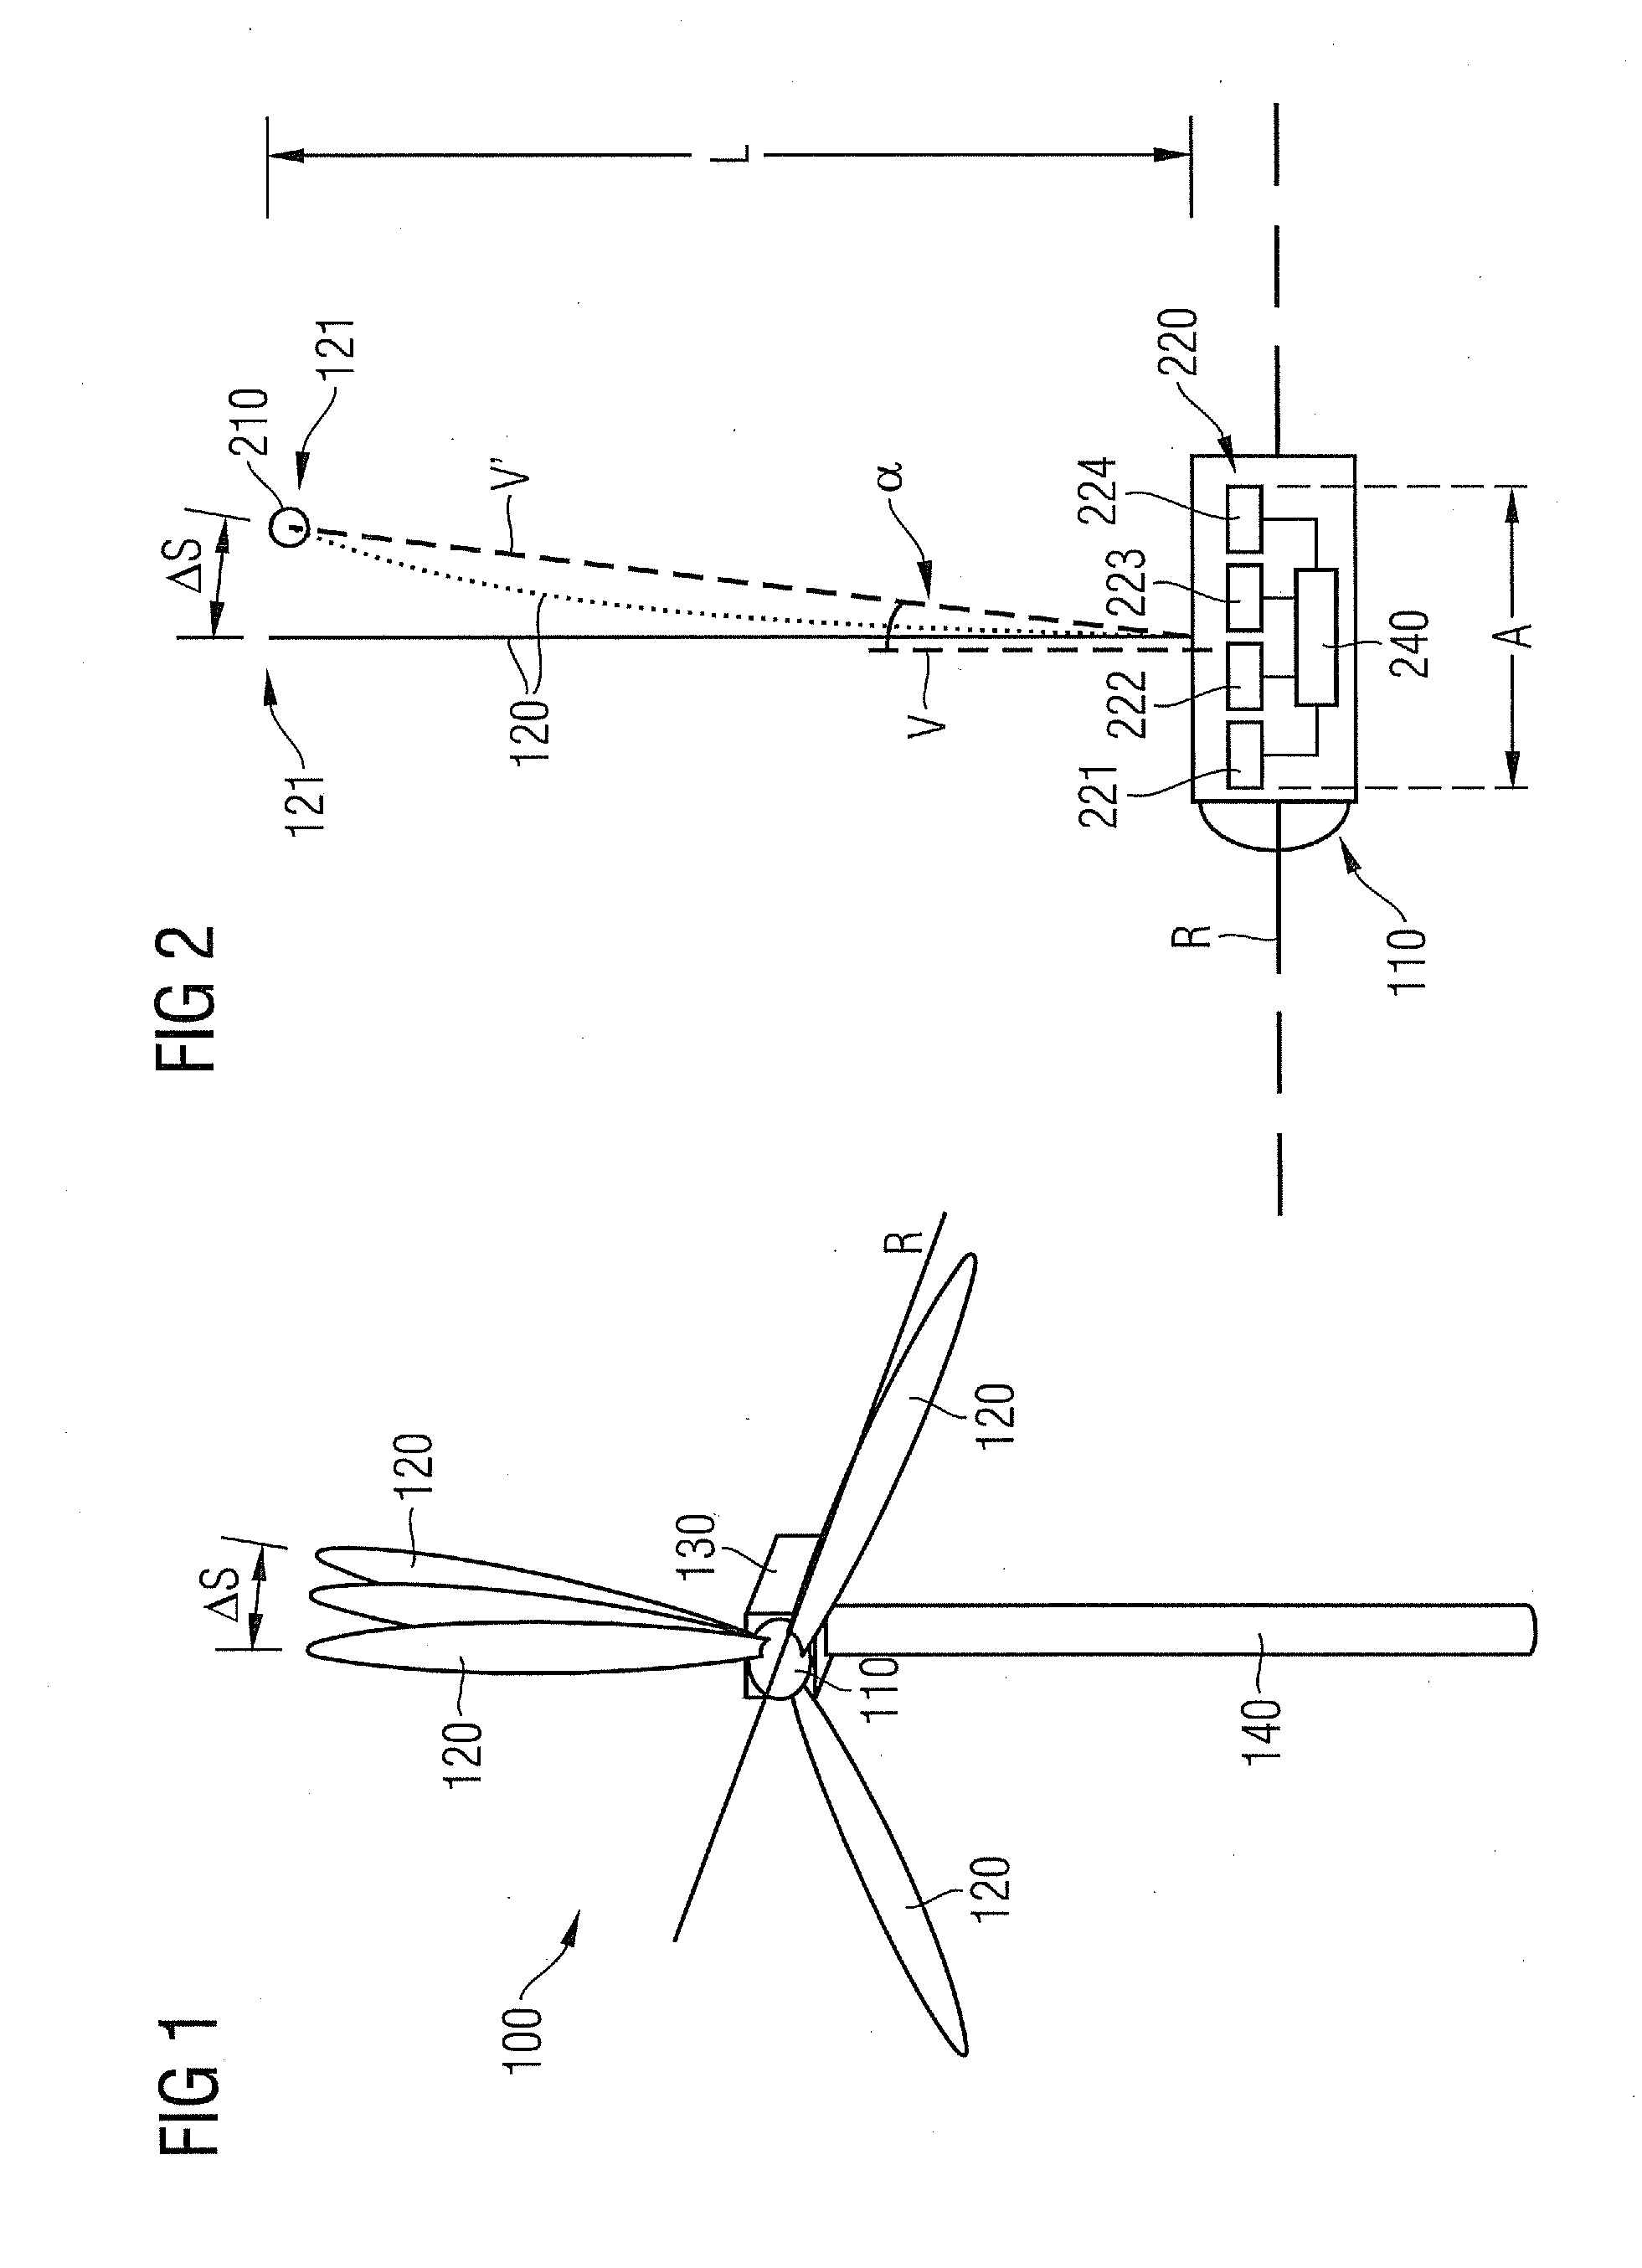 Detection of Deformation of a Wind Turbine Blade